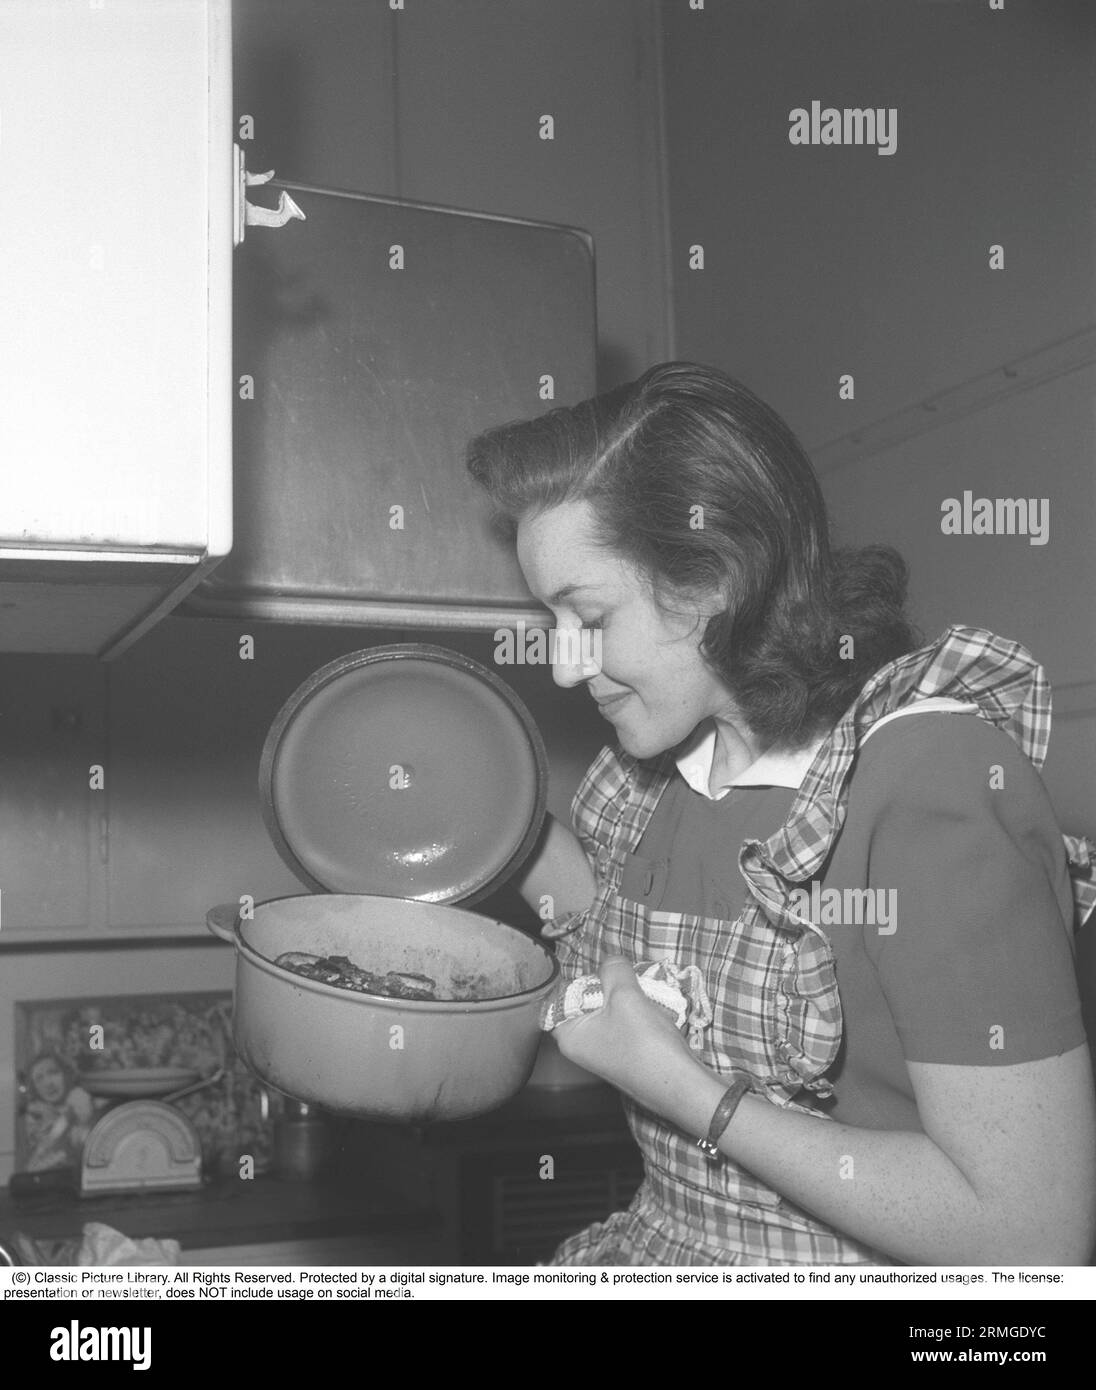 https://c8.alamy.com/comp/2RMGDYC/in-the-kitchen-1940s-interior-of-a-kitchen-and-a-young-woman-lifting-the-lid-of-a-saucepan-steaming-hot-and-looks-happy-with-how-it-turned-out-sweden-1946-kristoffersson-ref-cc122-1-2RMGDYC.jpg